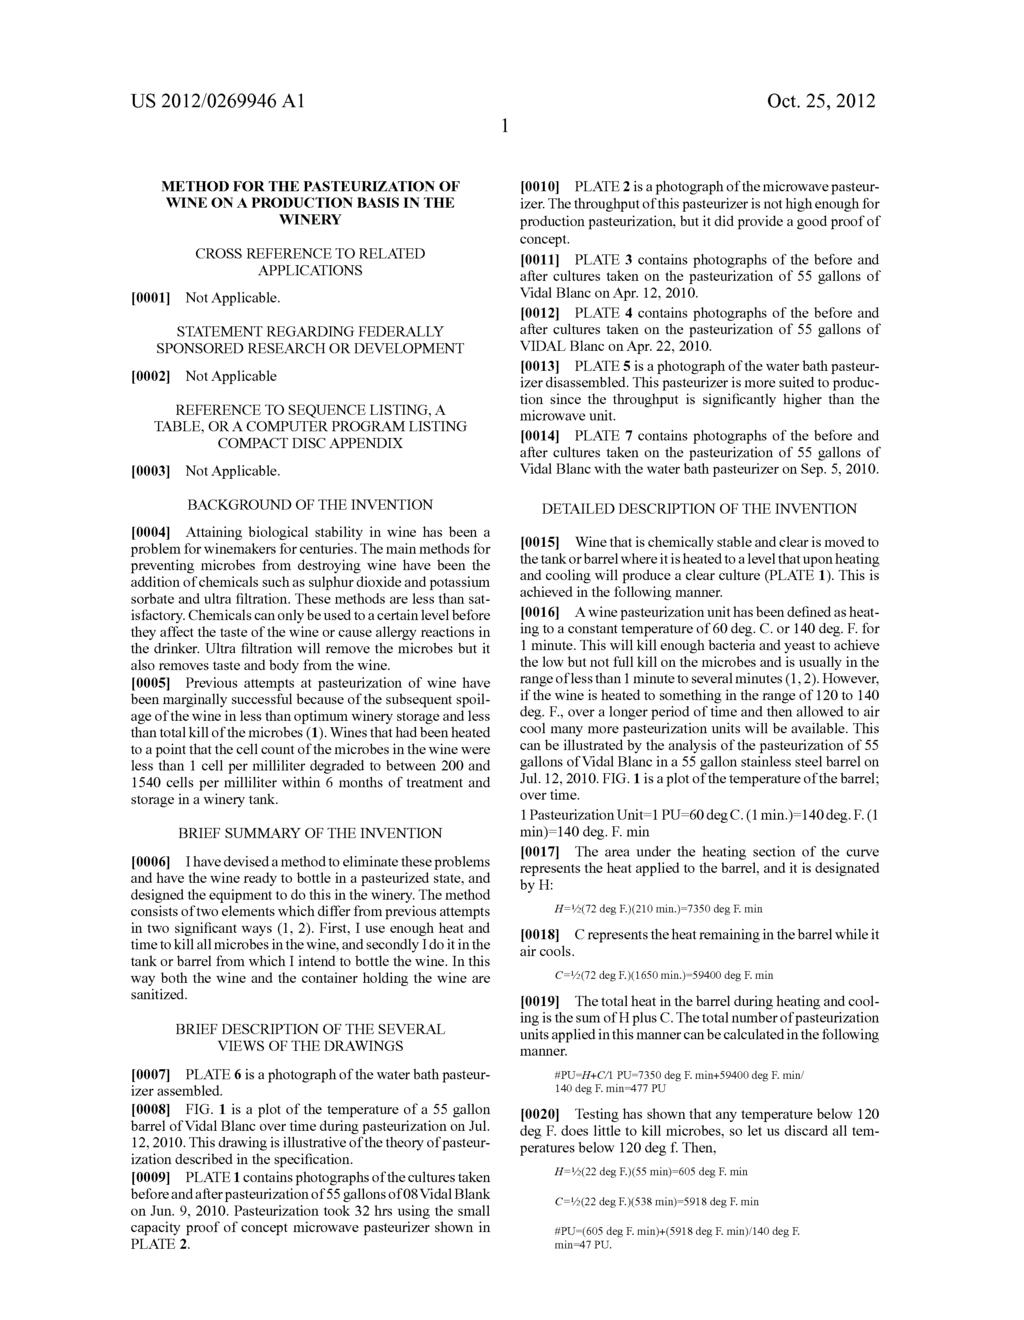 US 2012/026994.6 A1 Oct. 25, 2012 METHOD FOR THE PASTEURIZATION OF WINE ON A PRODUCTION BASIS IN THE WINERY CROSS REFERENCE TO RELATED APPLICATIONS 0001. Not Applicable.